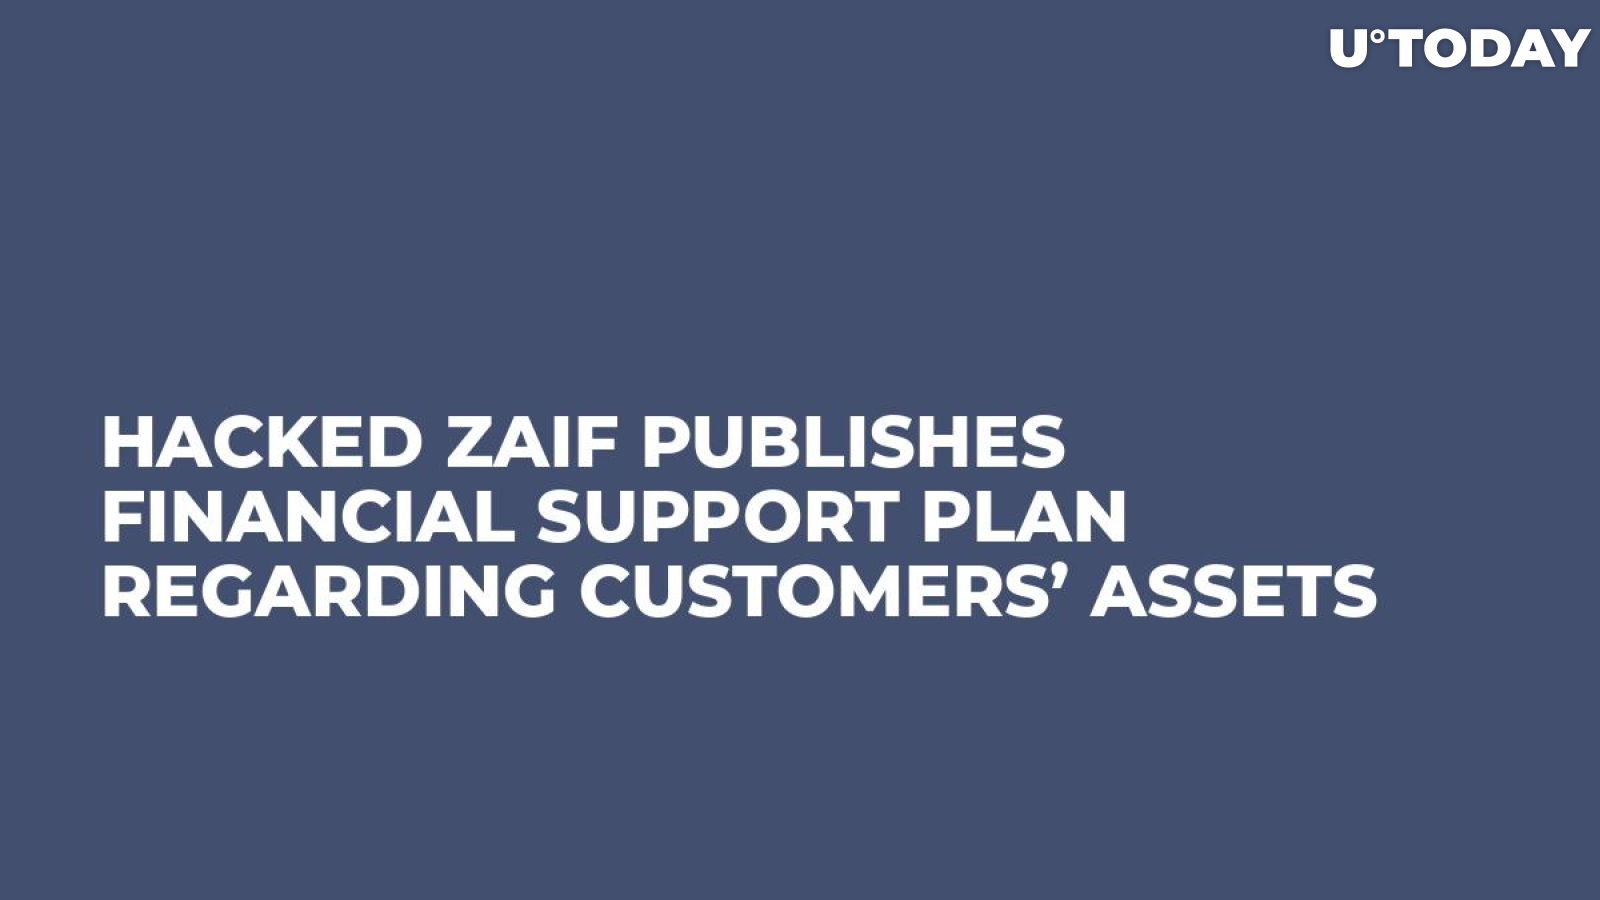 Hacked Zaif Publishes Financial Support Plan Regarding Customers’ Assets